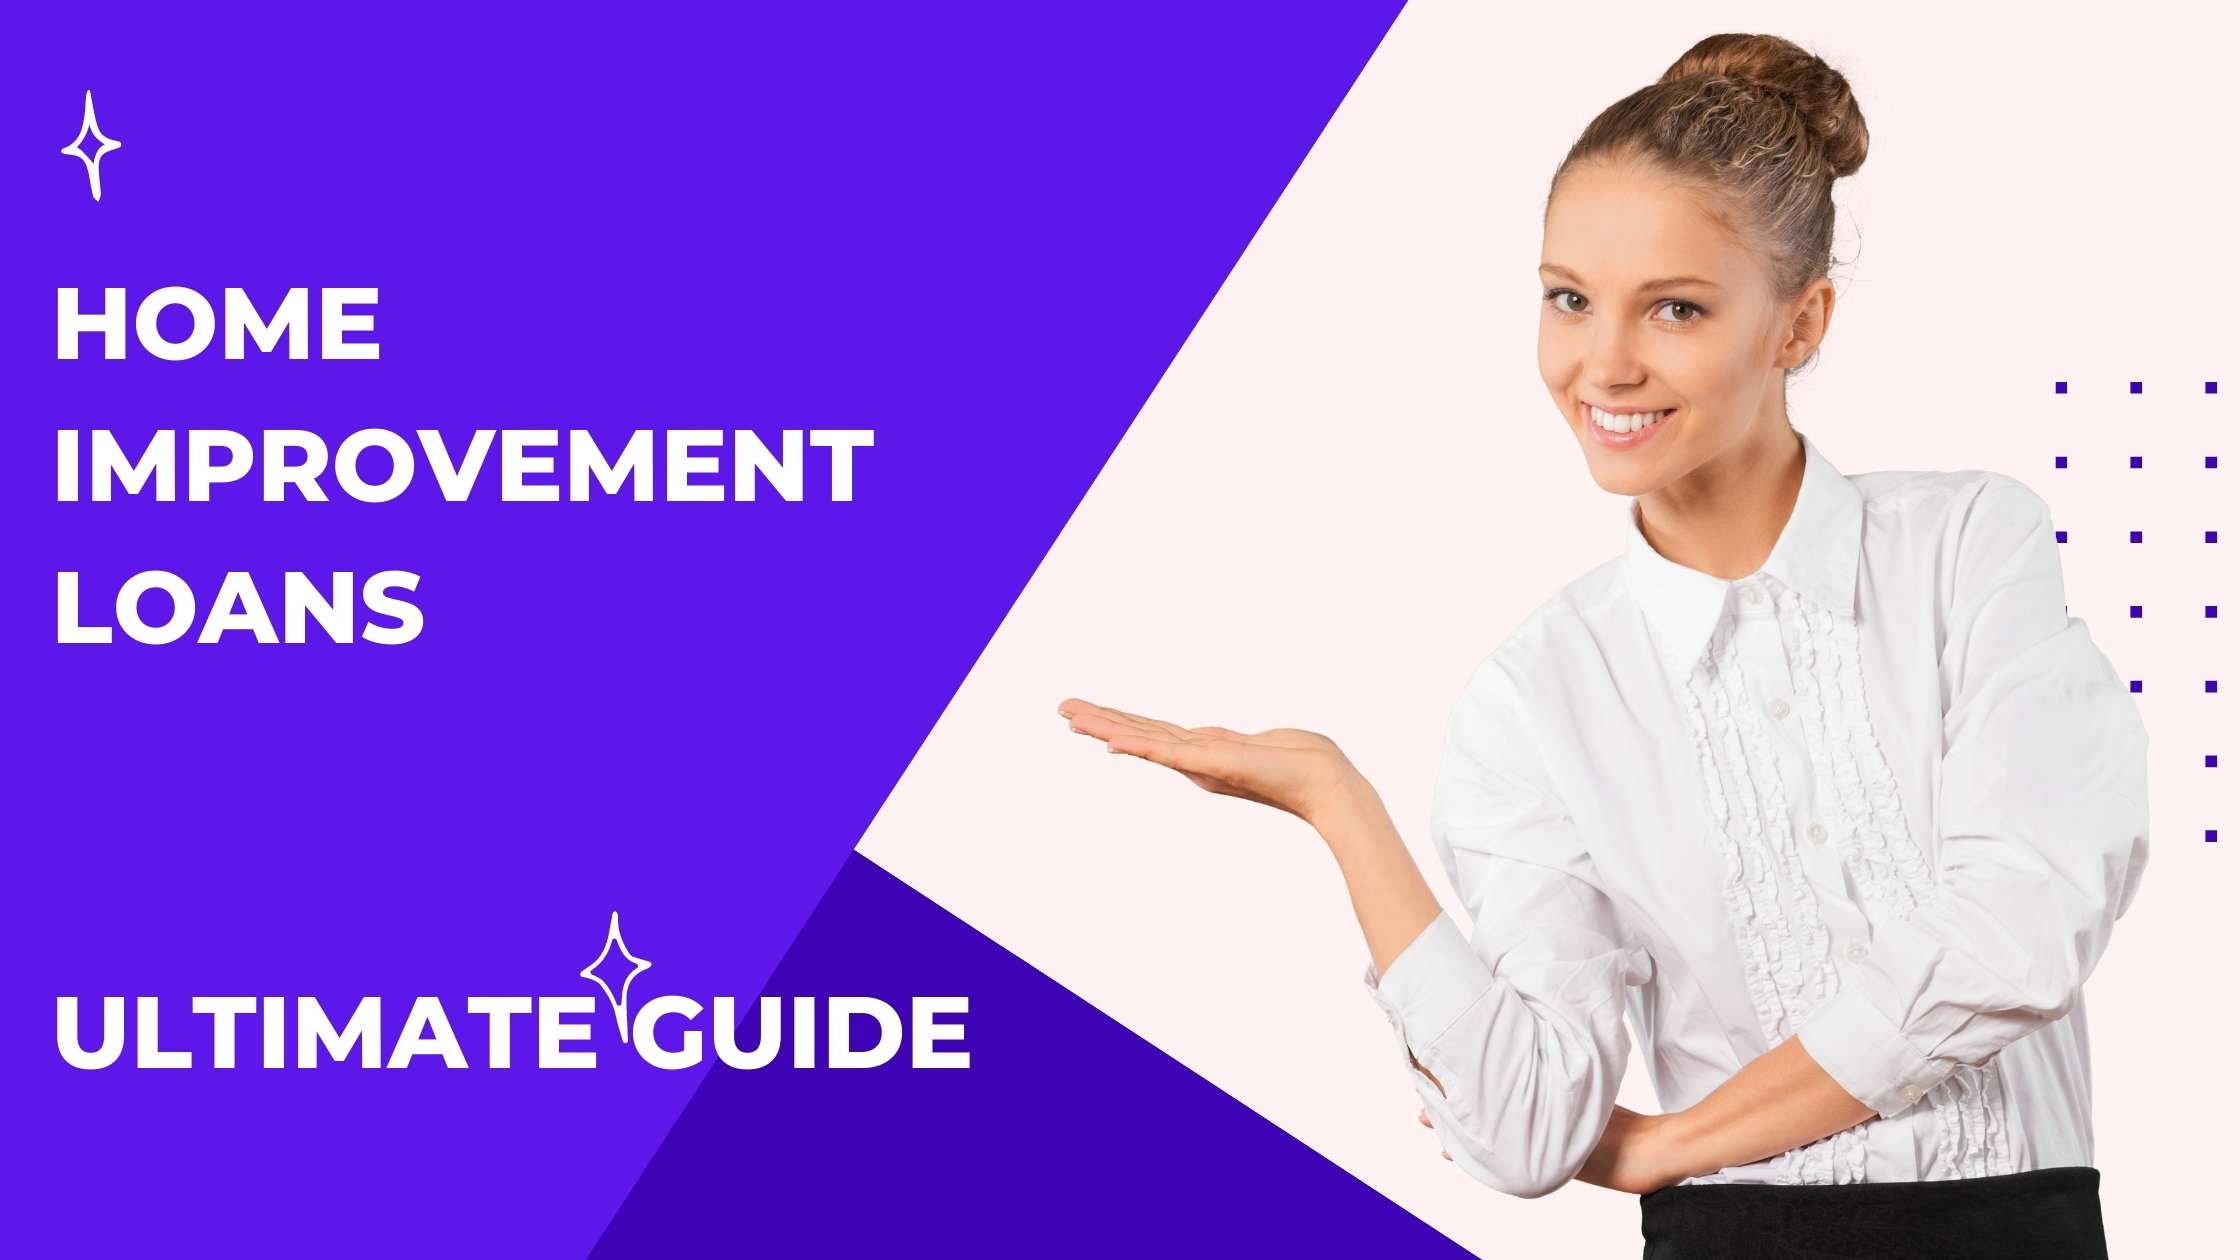 Home Improvement Loans Ultimate Guide for Beginners